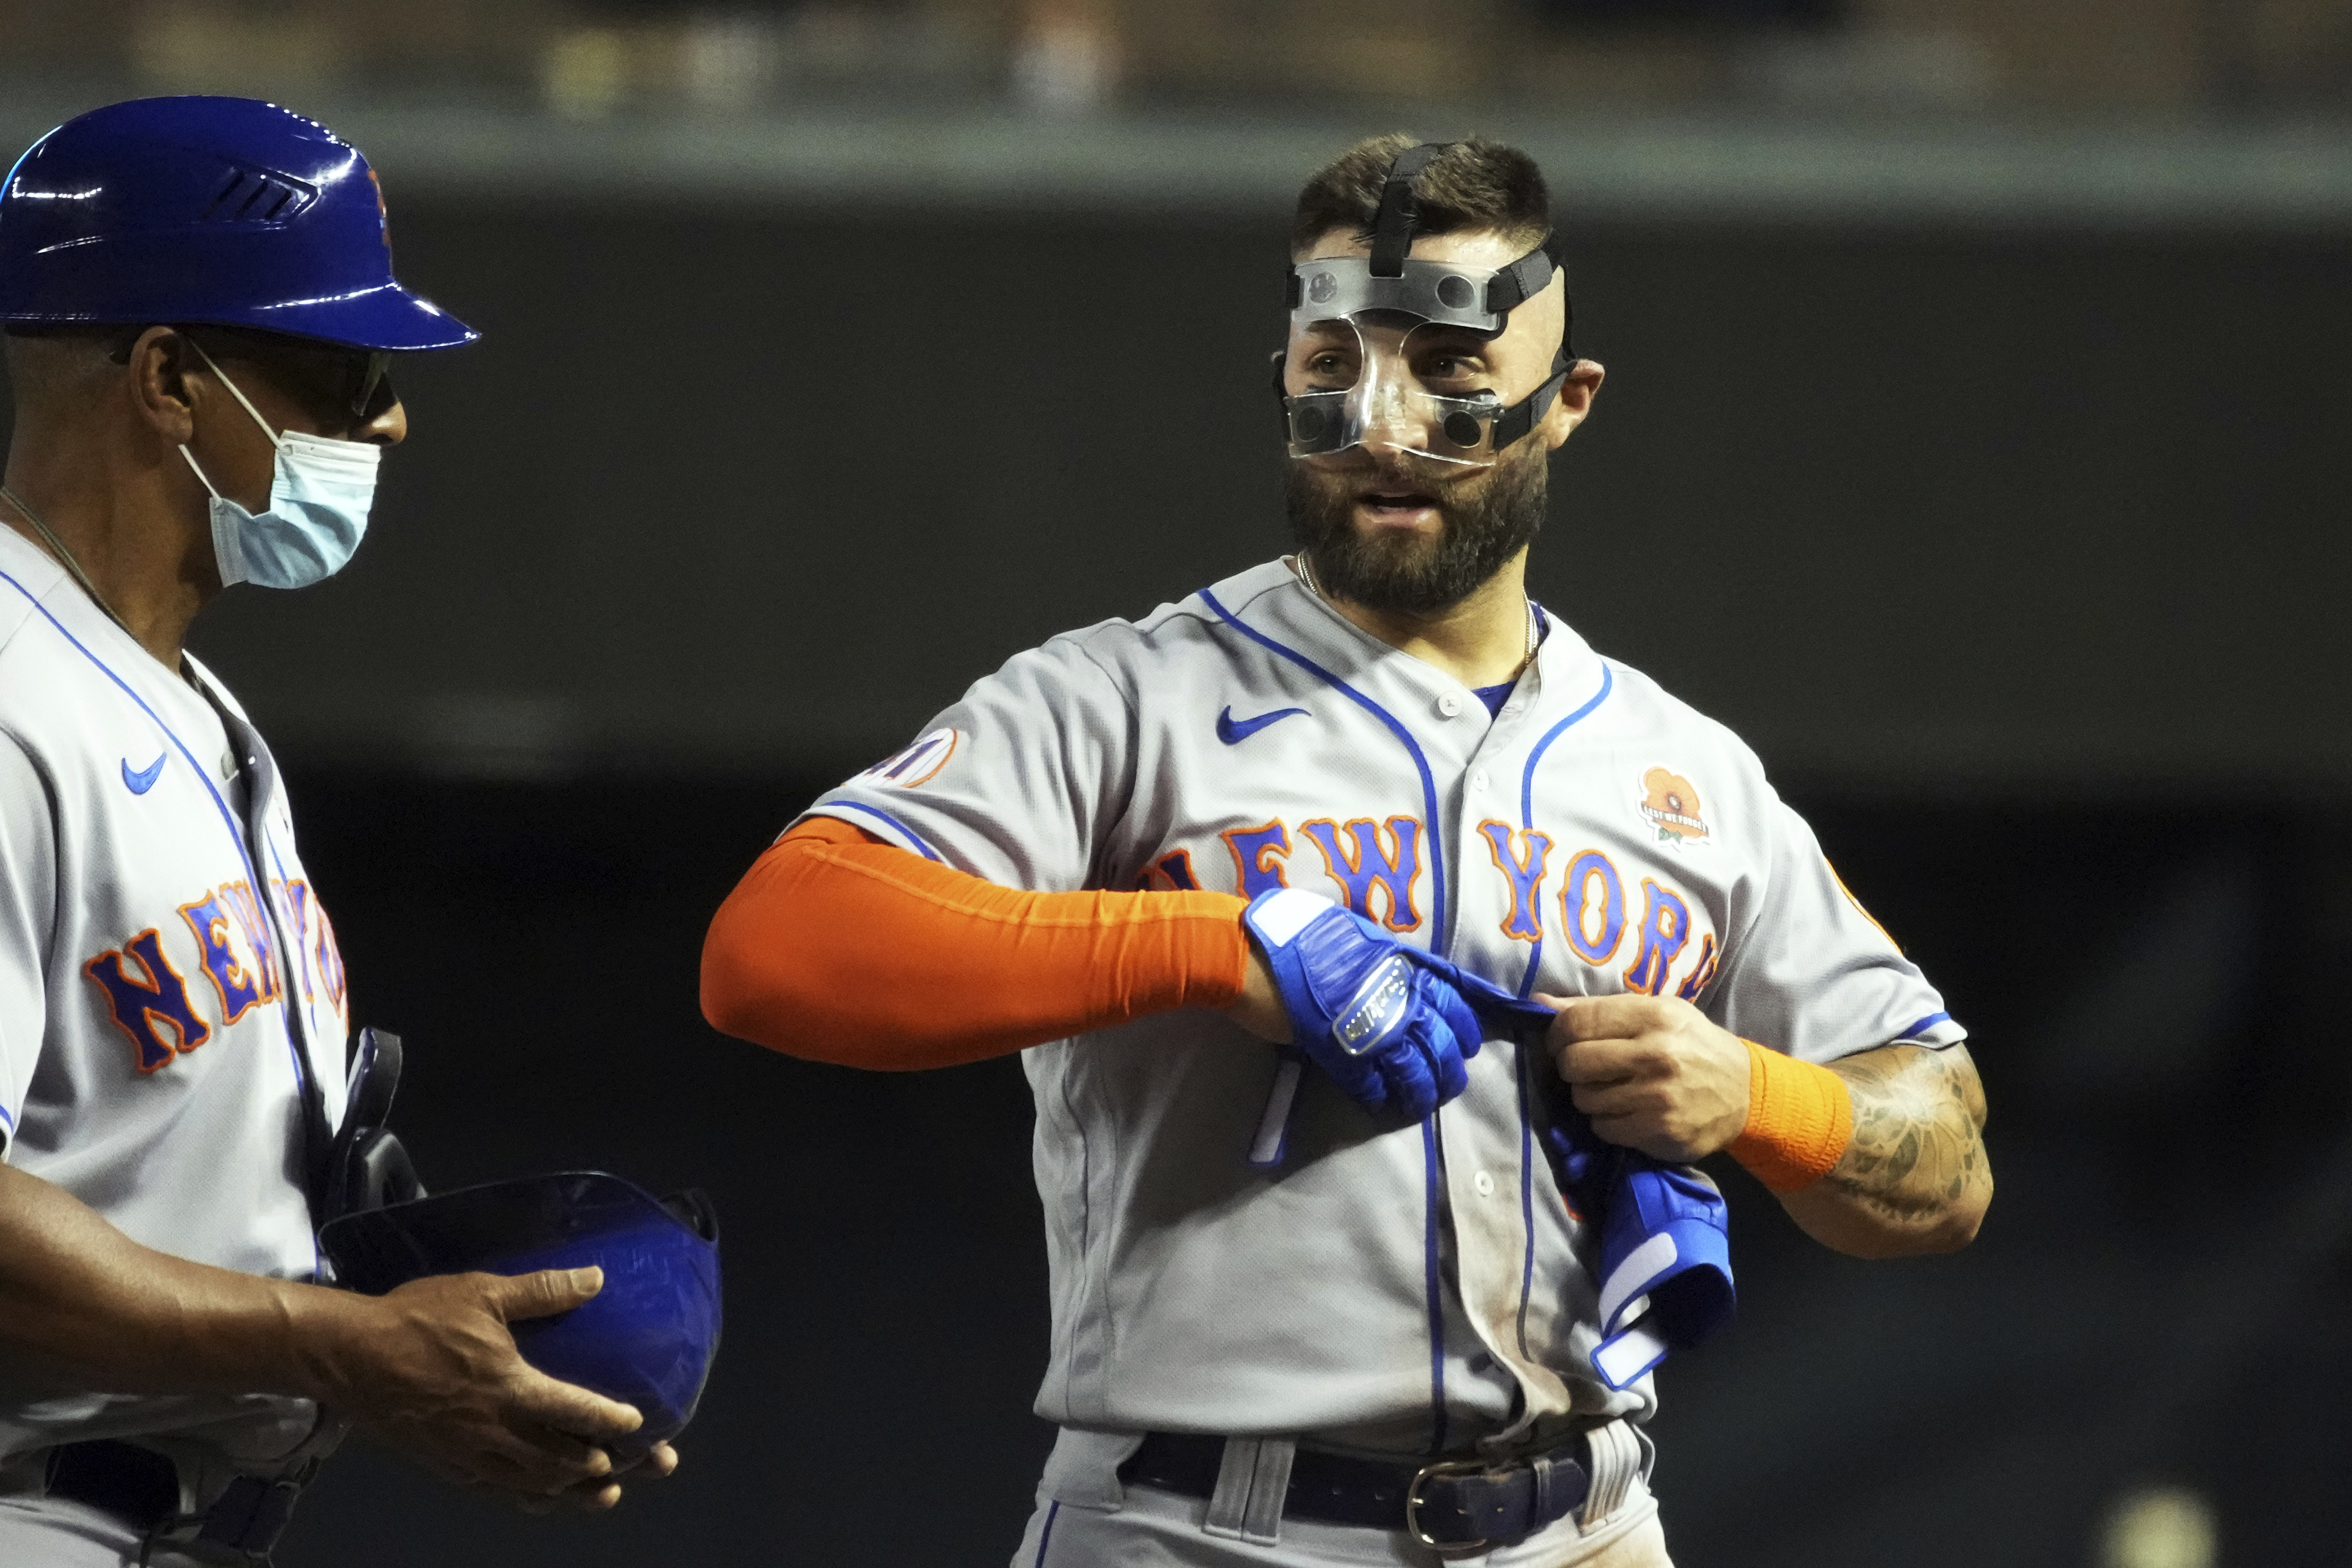 Mets' Kevin Pillar leaves game after gruesome pitch to face